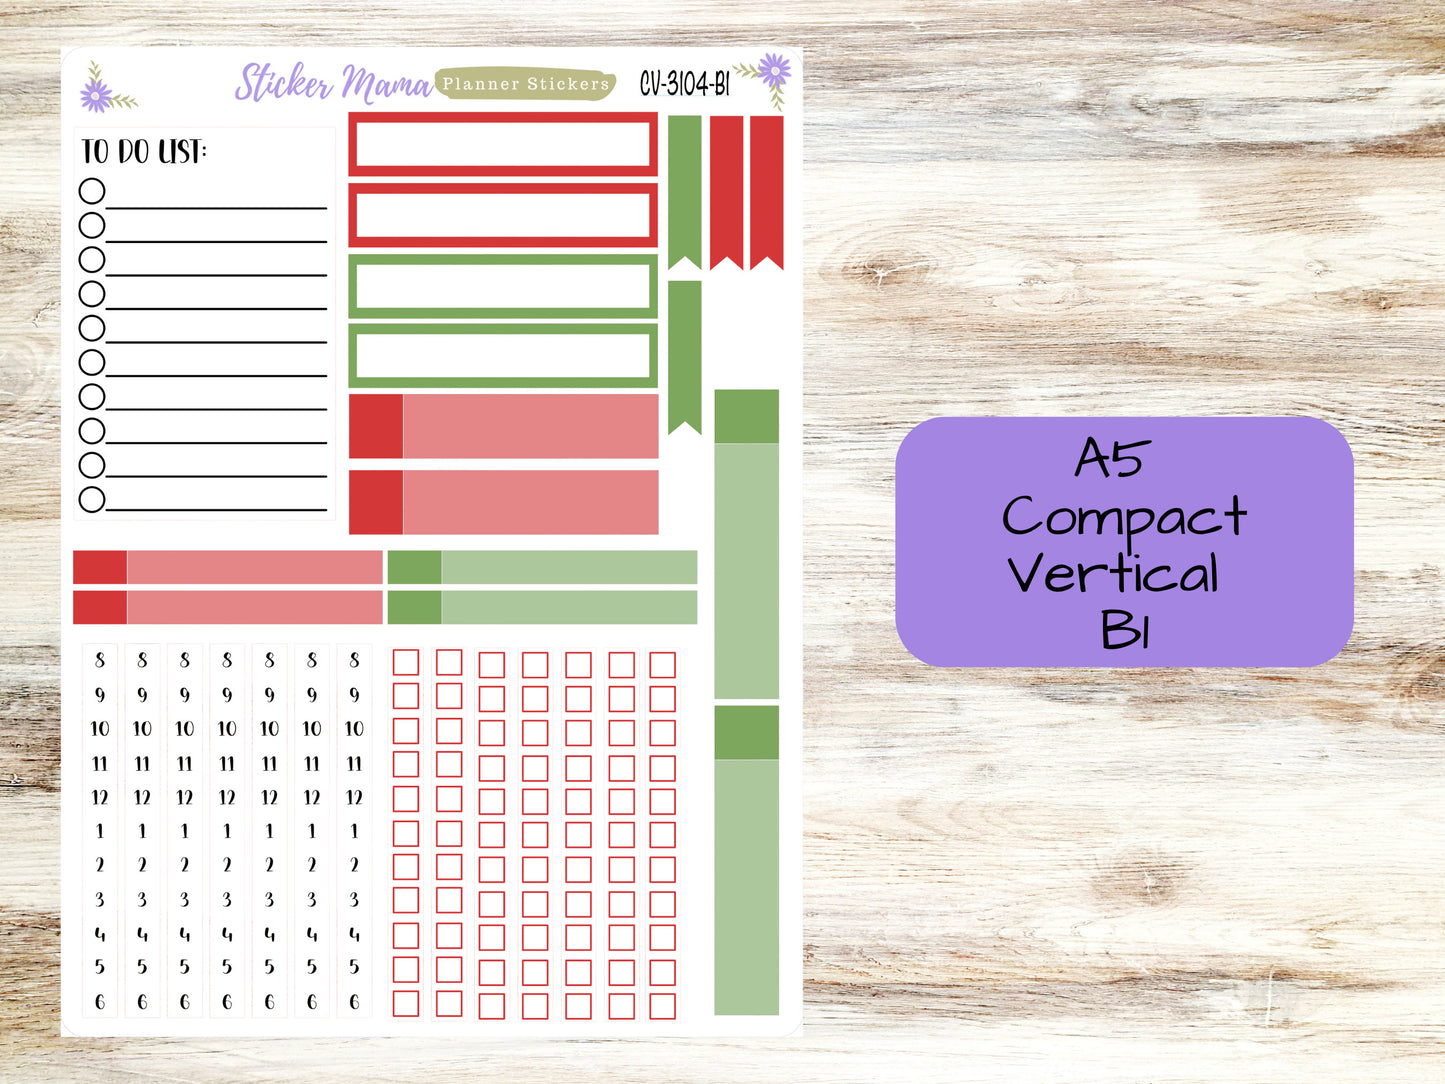 A5 COMPACT VERTICAL-Kit #3104 || Santa's Here  - Compact Vertical - Planner Stickers - Erin Condren Compact Vertical Weekly Kit